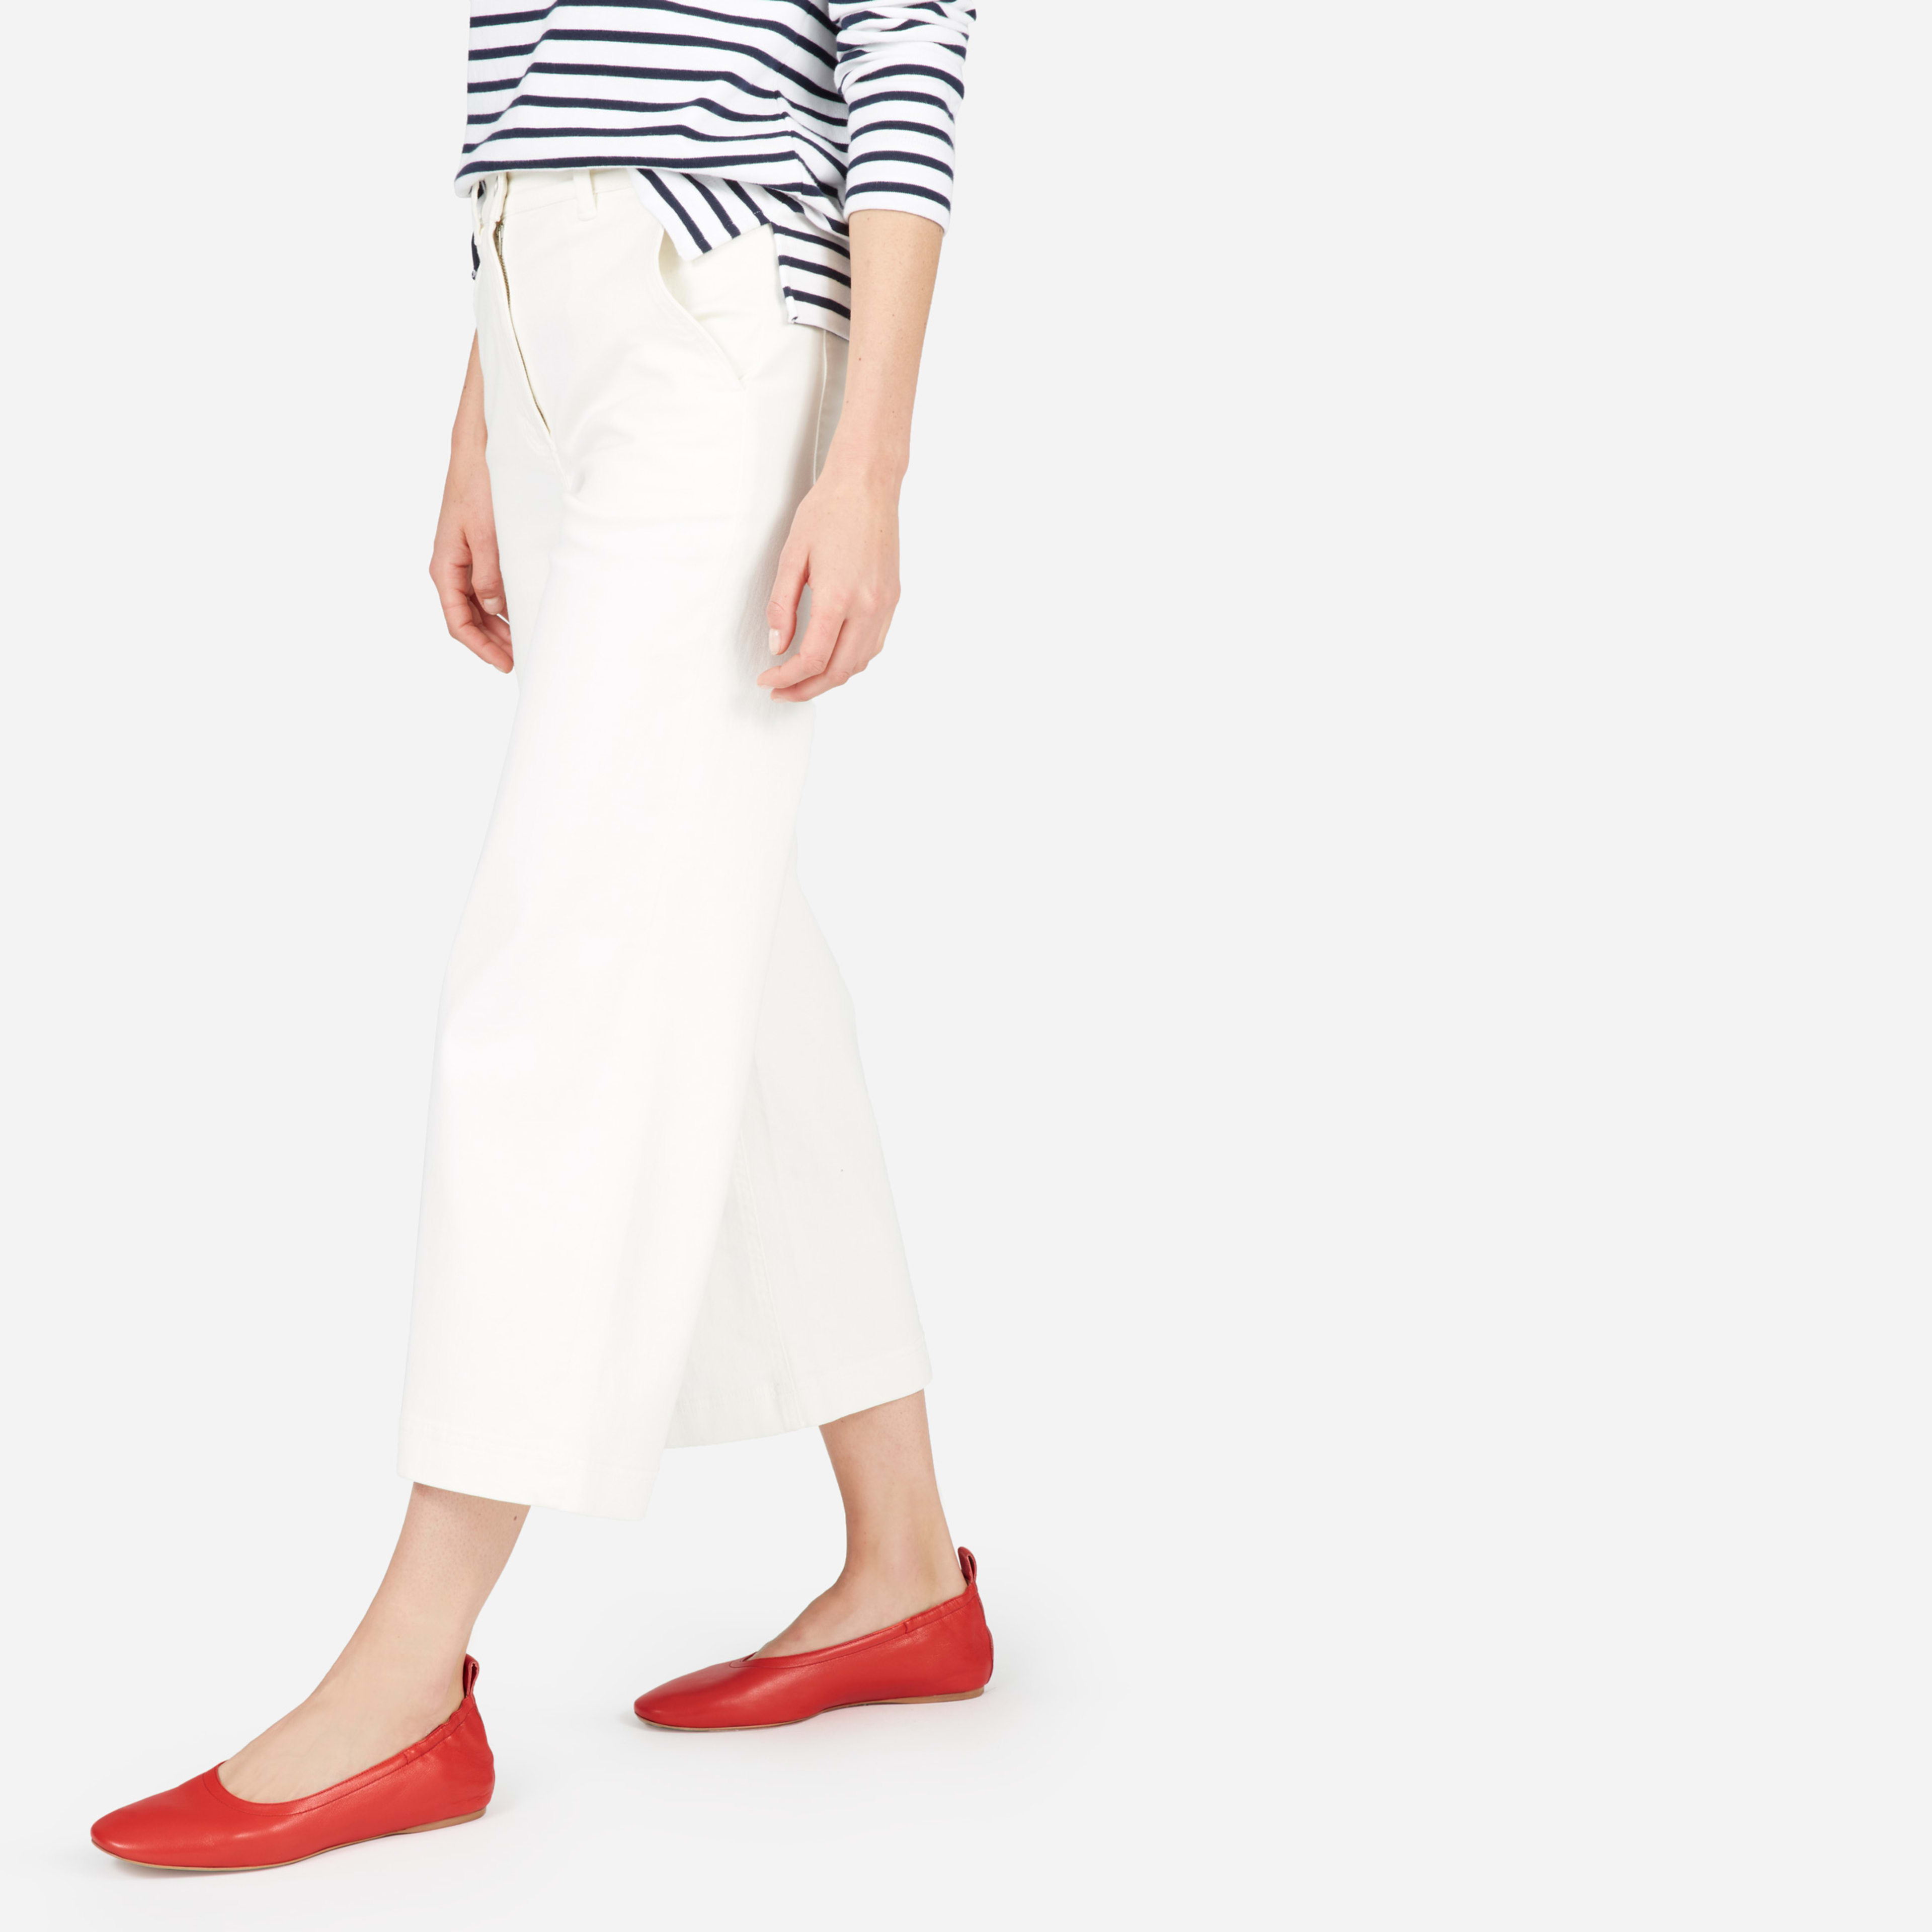 The Day Flat Bright Red – Everlane